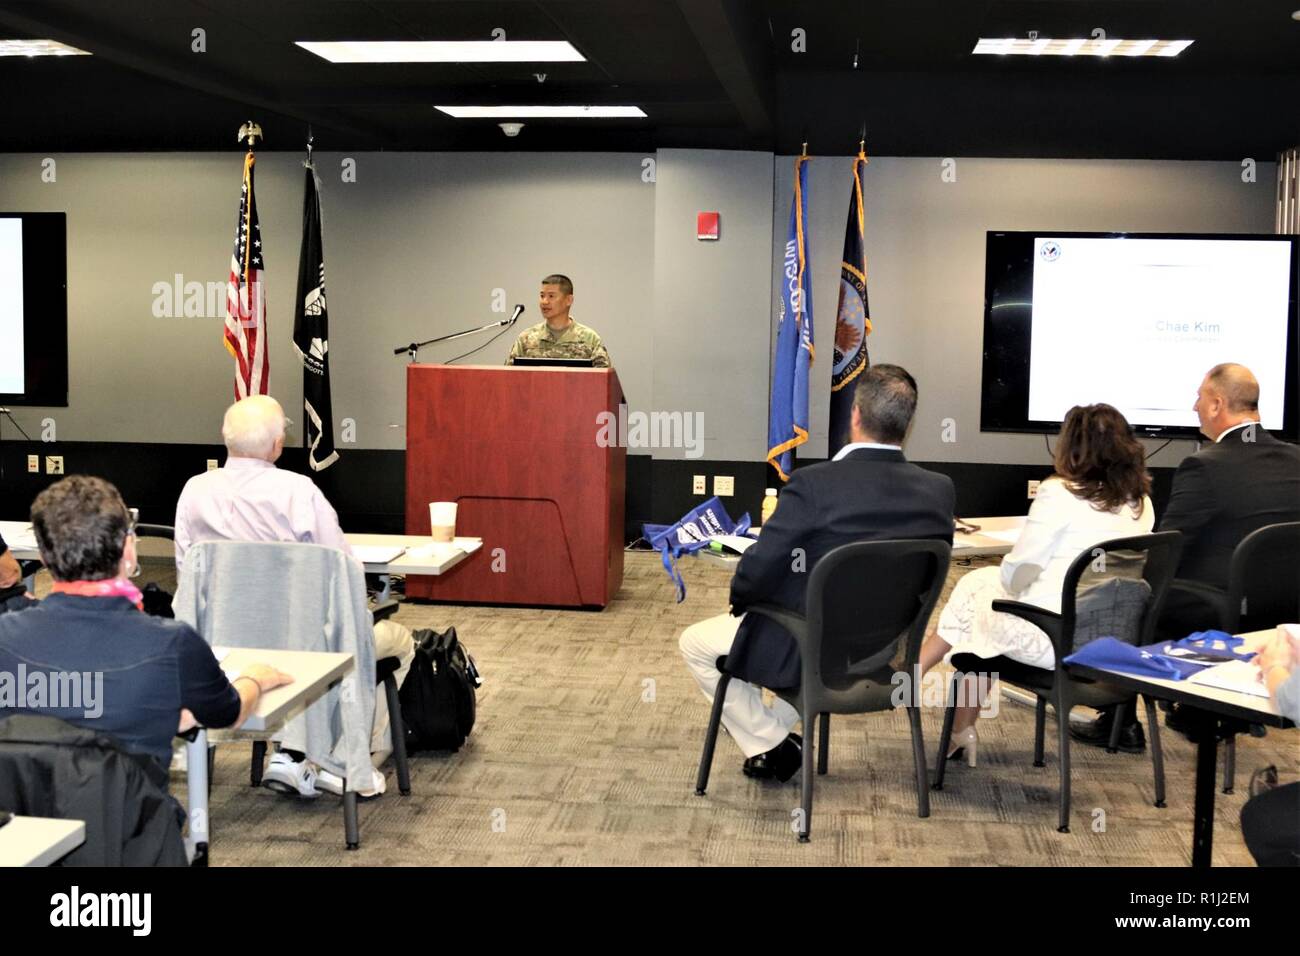 Fort McCoy Garrison Commander Col. Hui Chae Kim provides opening remarks and a welcome to the attendees to the Tomah Veterans Affairs Medical Center Mental Health Summit on Sept. 20, 2018, at Fort McCoy, Wis. The day-long summit featured many guest speakers, demonstrations of Fort McCoy simulations systems, and more. Stock Photo